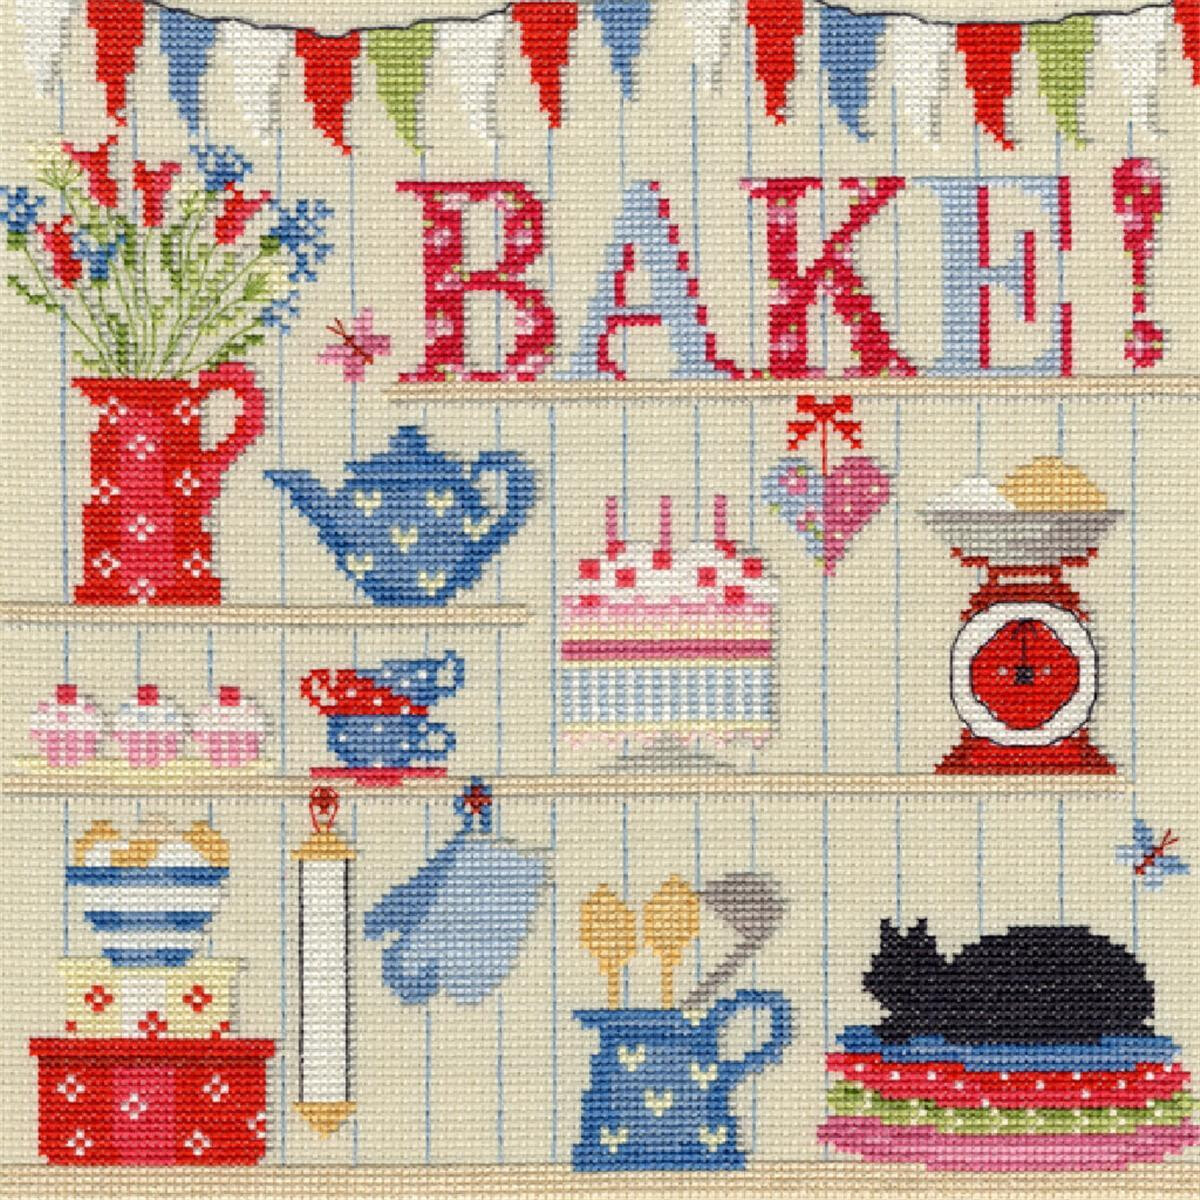 A colorful design from Bothy Threads embroidery pack with...